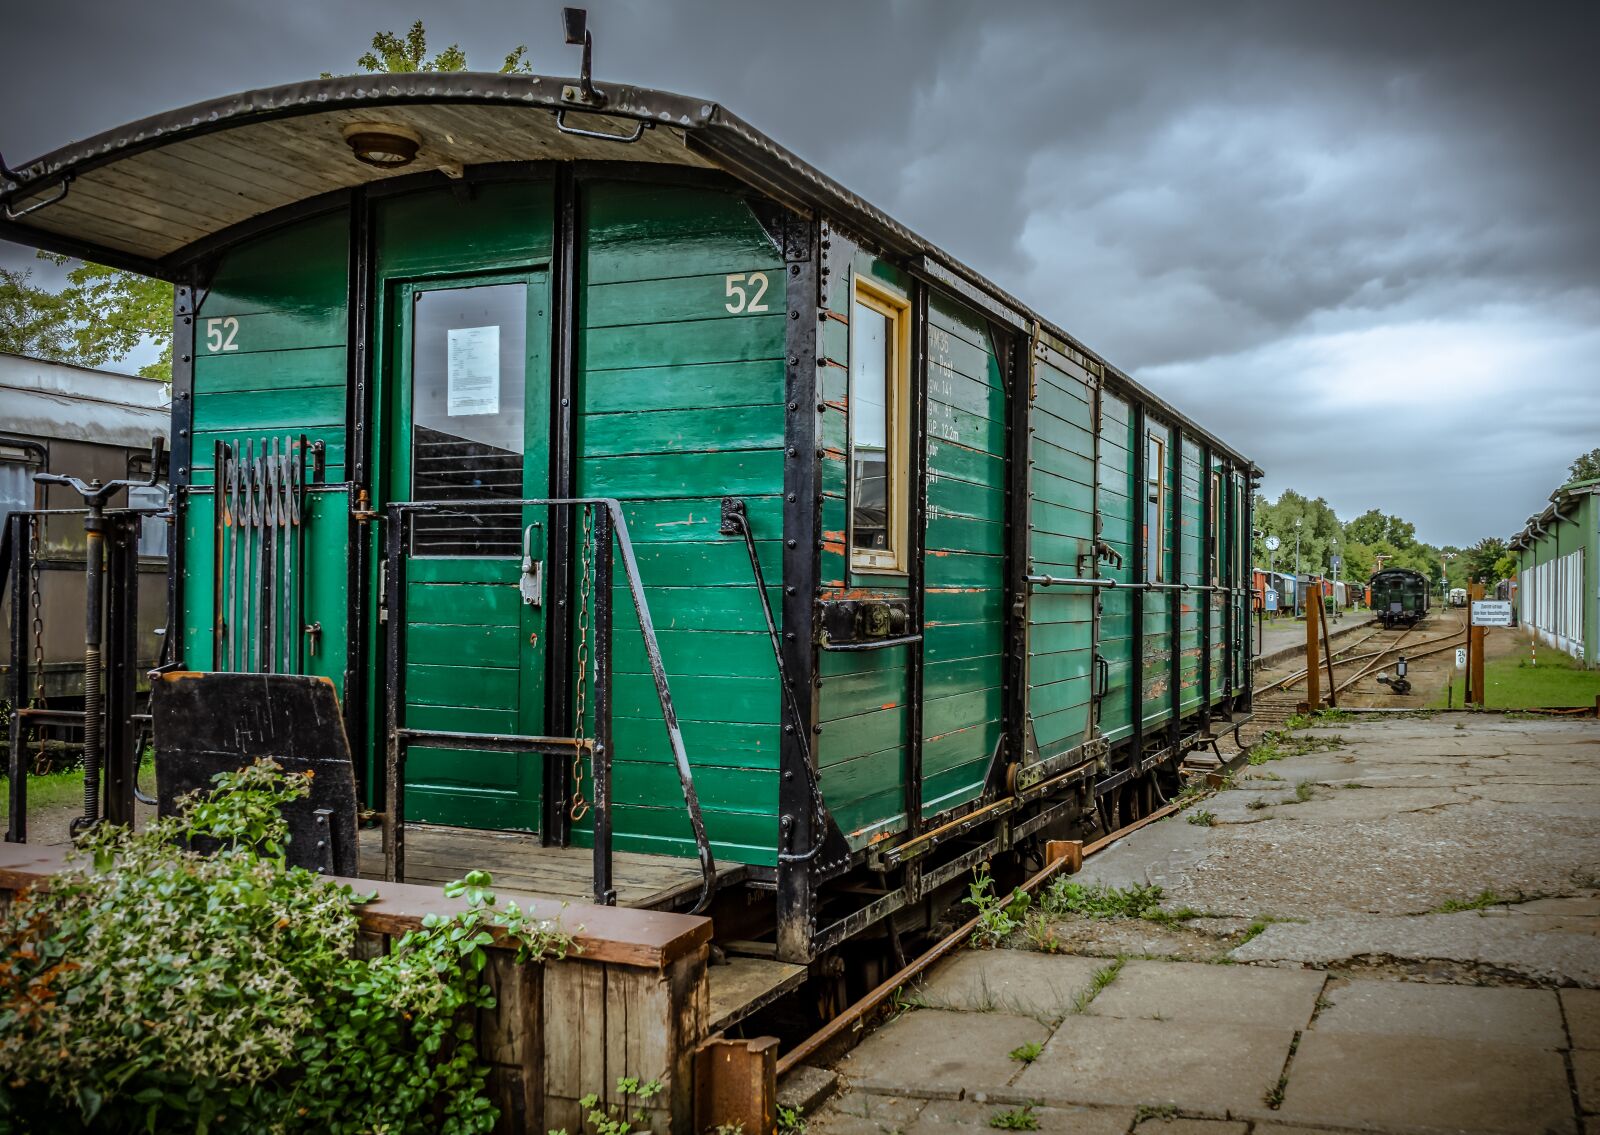 Sony a7 II sample photo. Railway carriages, wood, metal photography